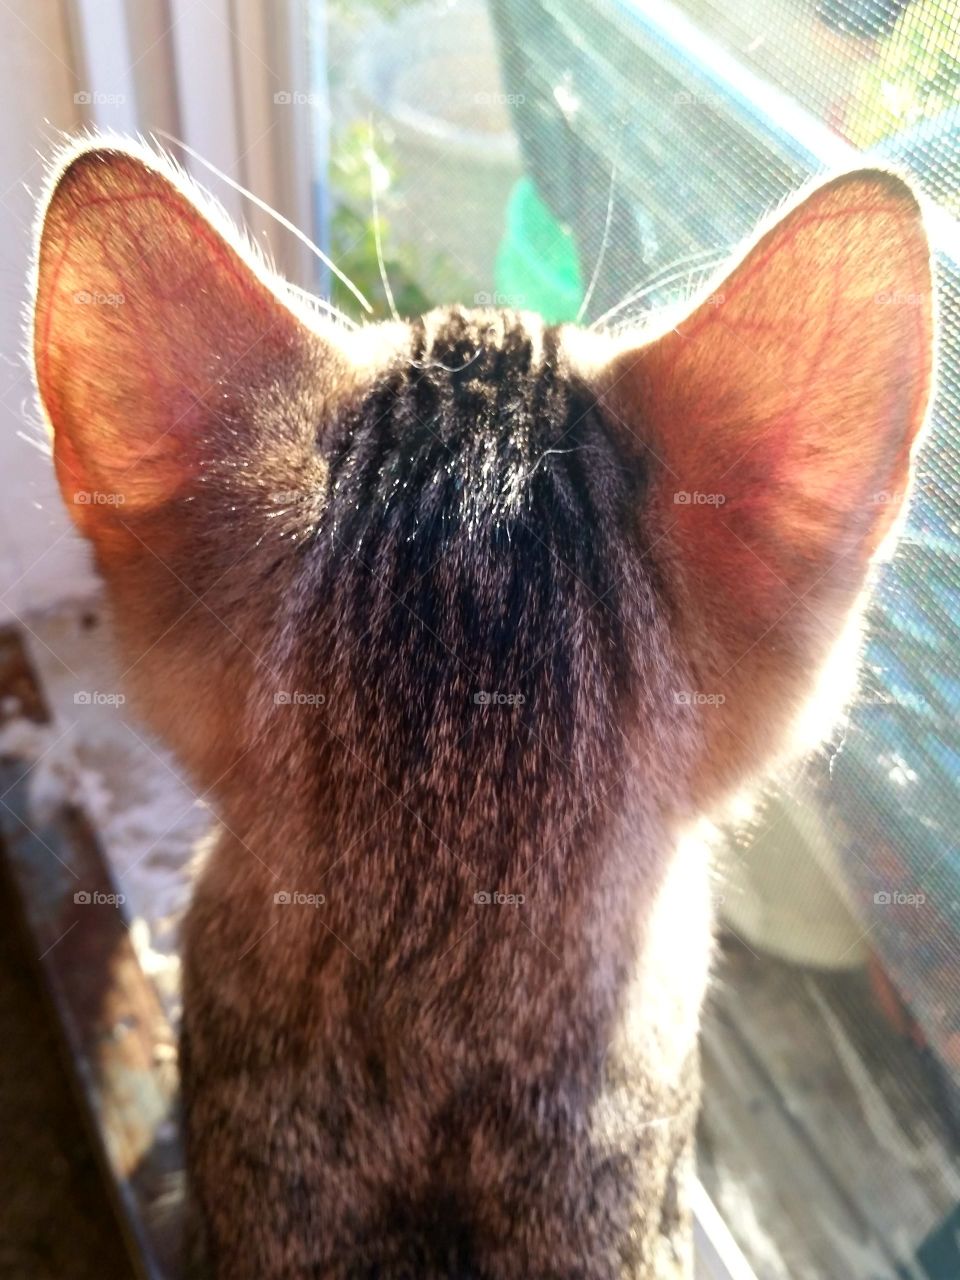 Big eared kitten looking out at the world!